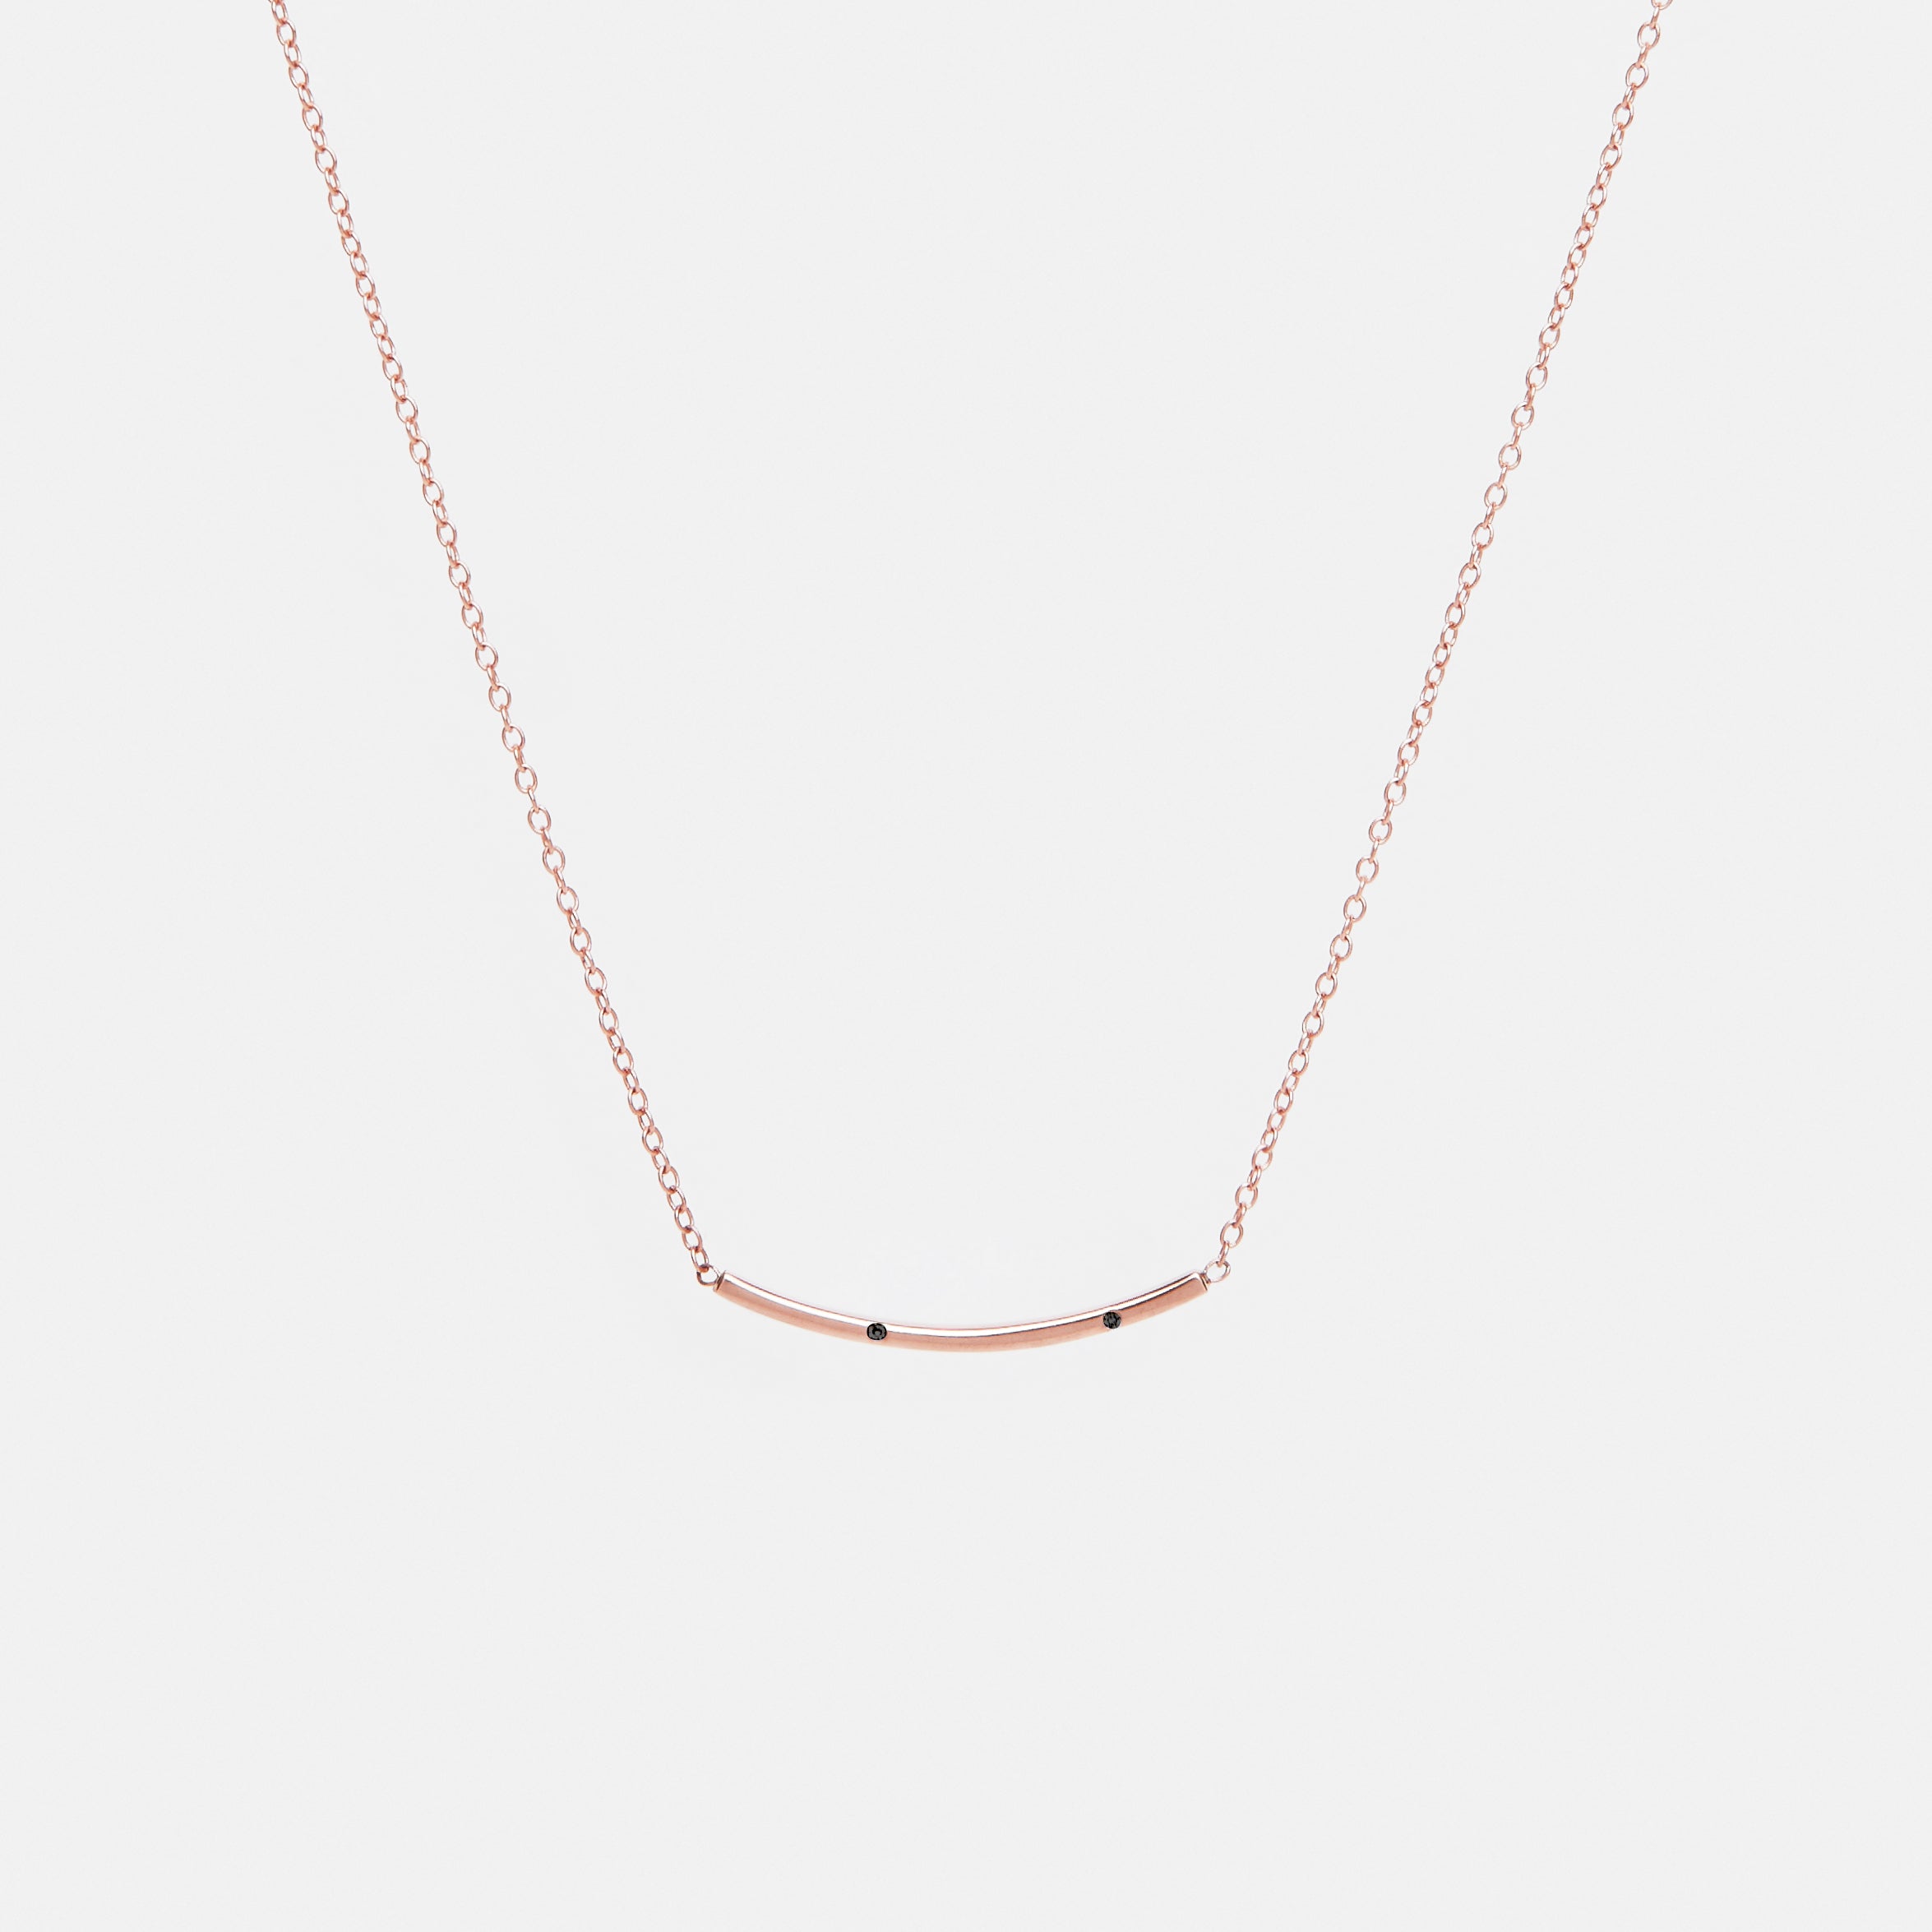 Sara Handmade Necklace in 14k Rose Gold set with Black Diamonds By SHW Fine Jewelry NYC